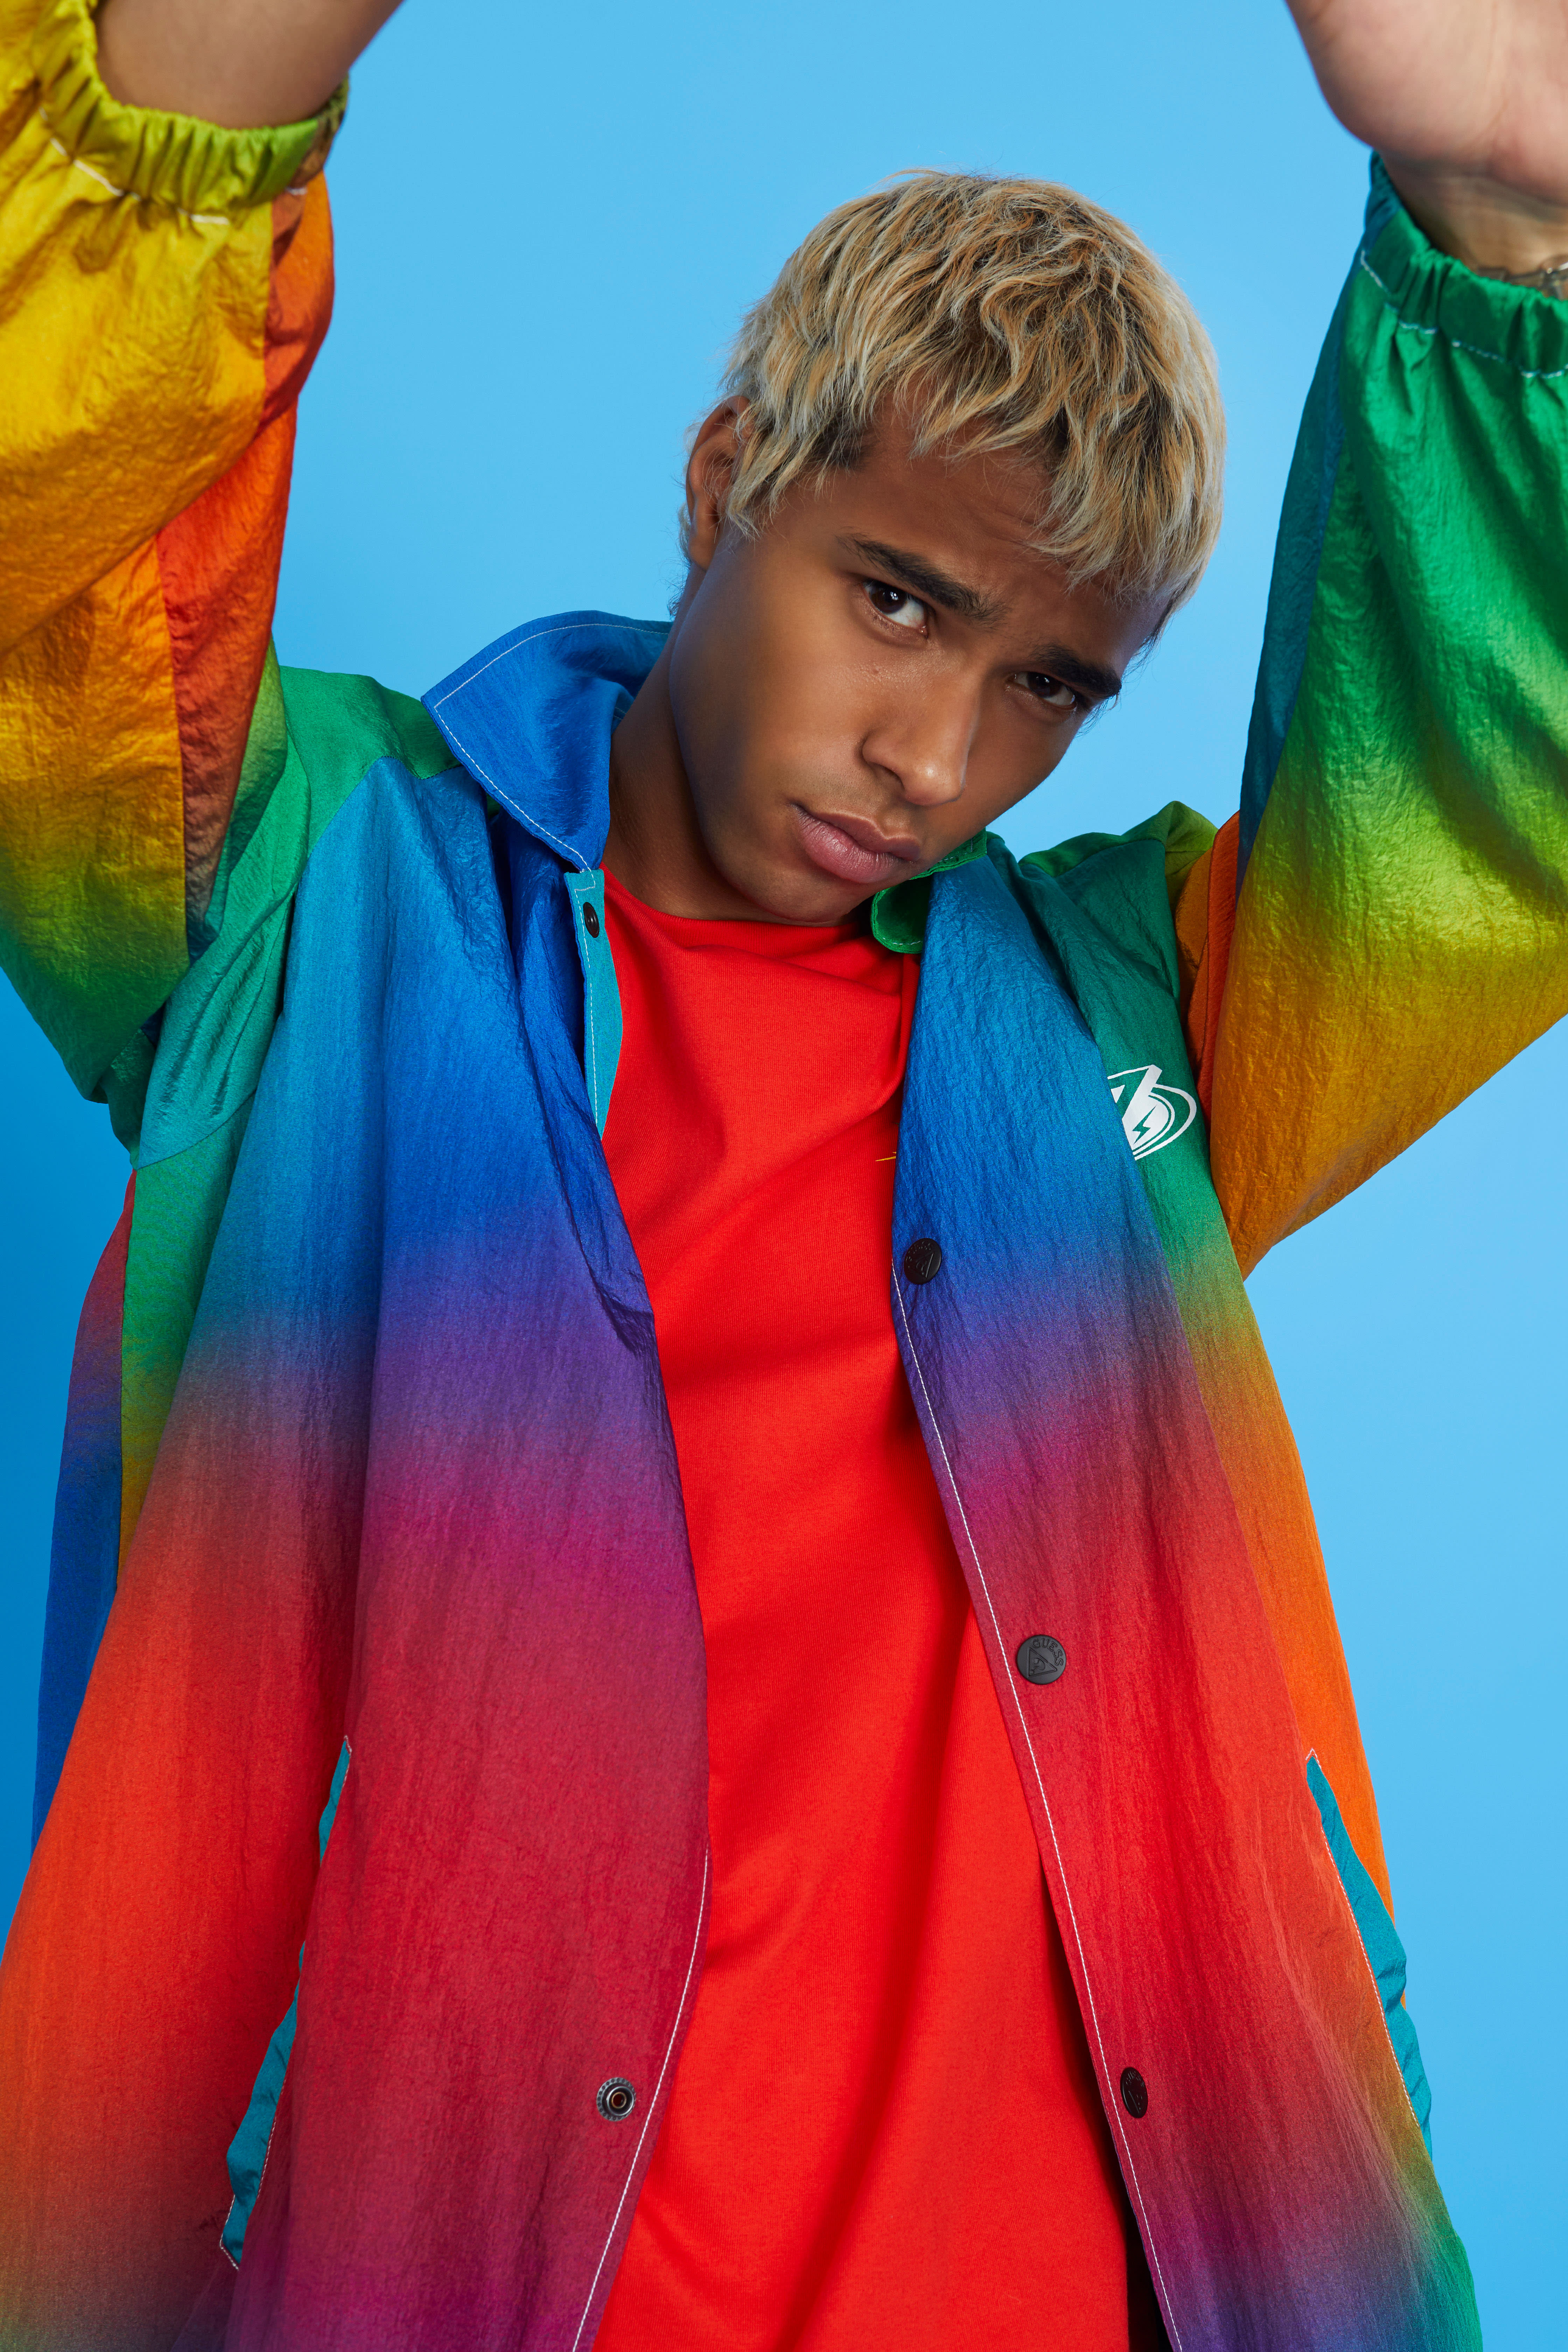 Pesimista Armonioso Aumentar J Balvin &amp; GUESS Share Behind-the-Scenes Look at 'Colores' 2020  Collection Campaign | Complex